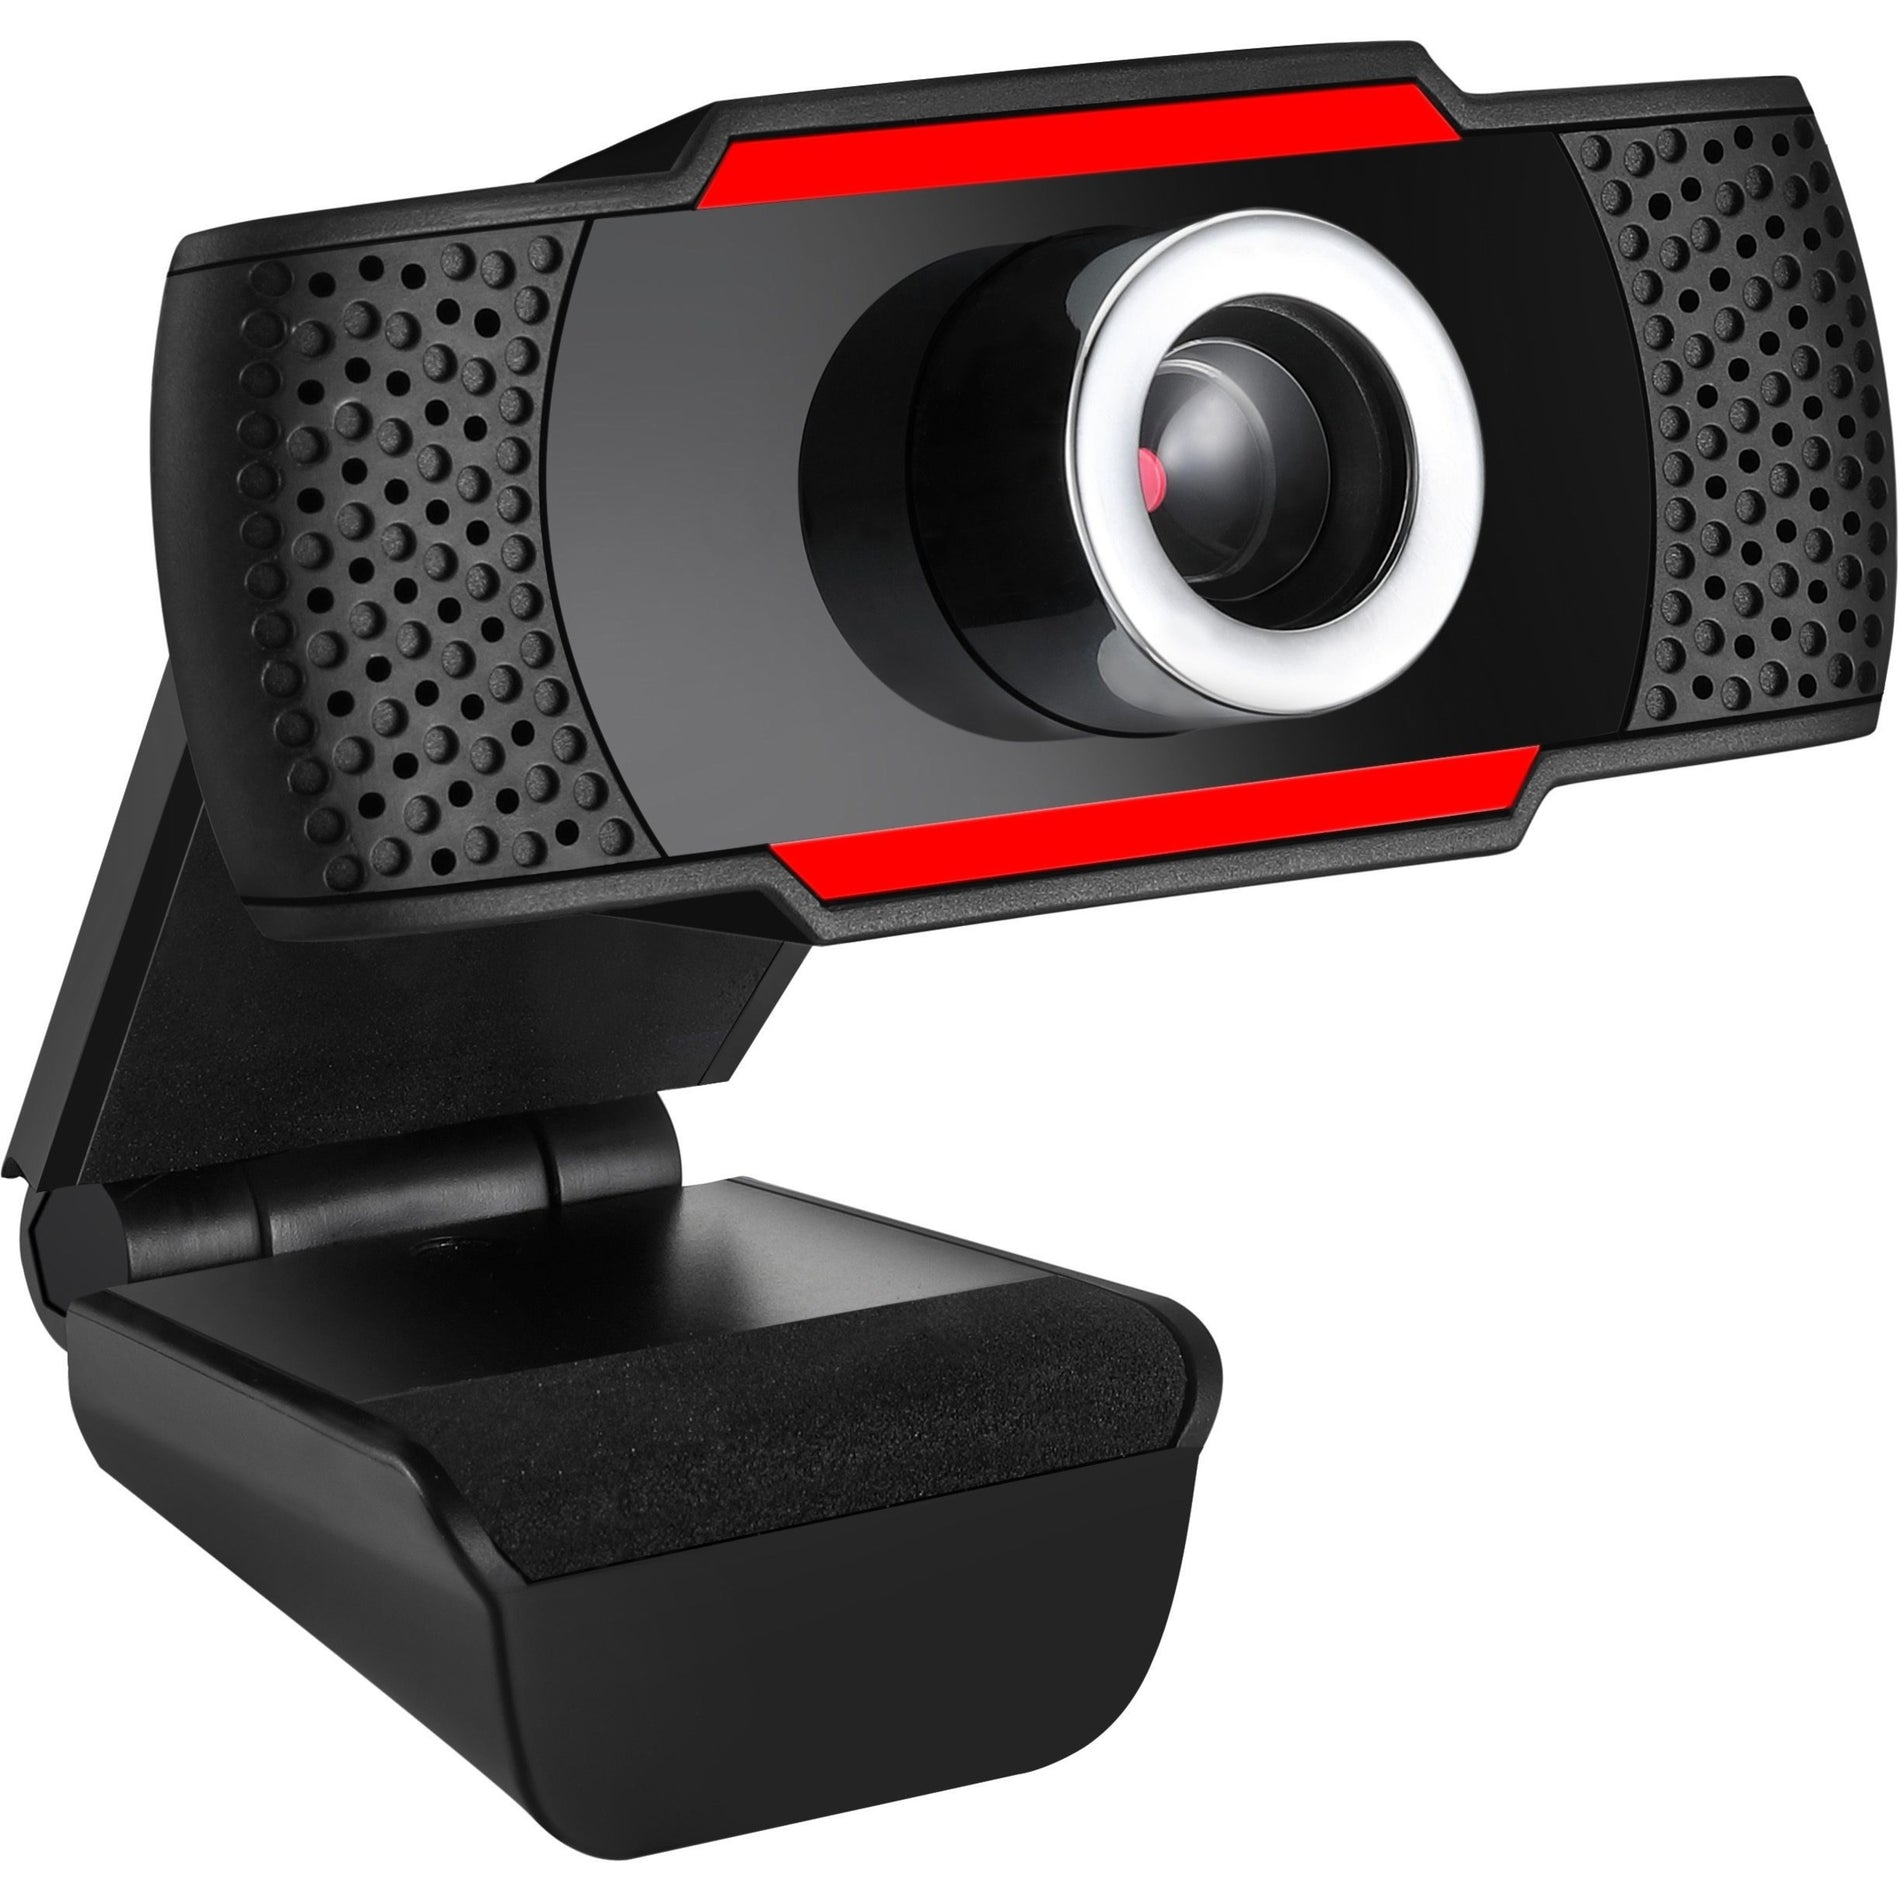 Adesso CYBERTRACKH3 720P HD USB Webcam with Integrated Microphone, Auto Focus, 30 fps